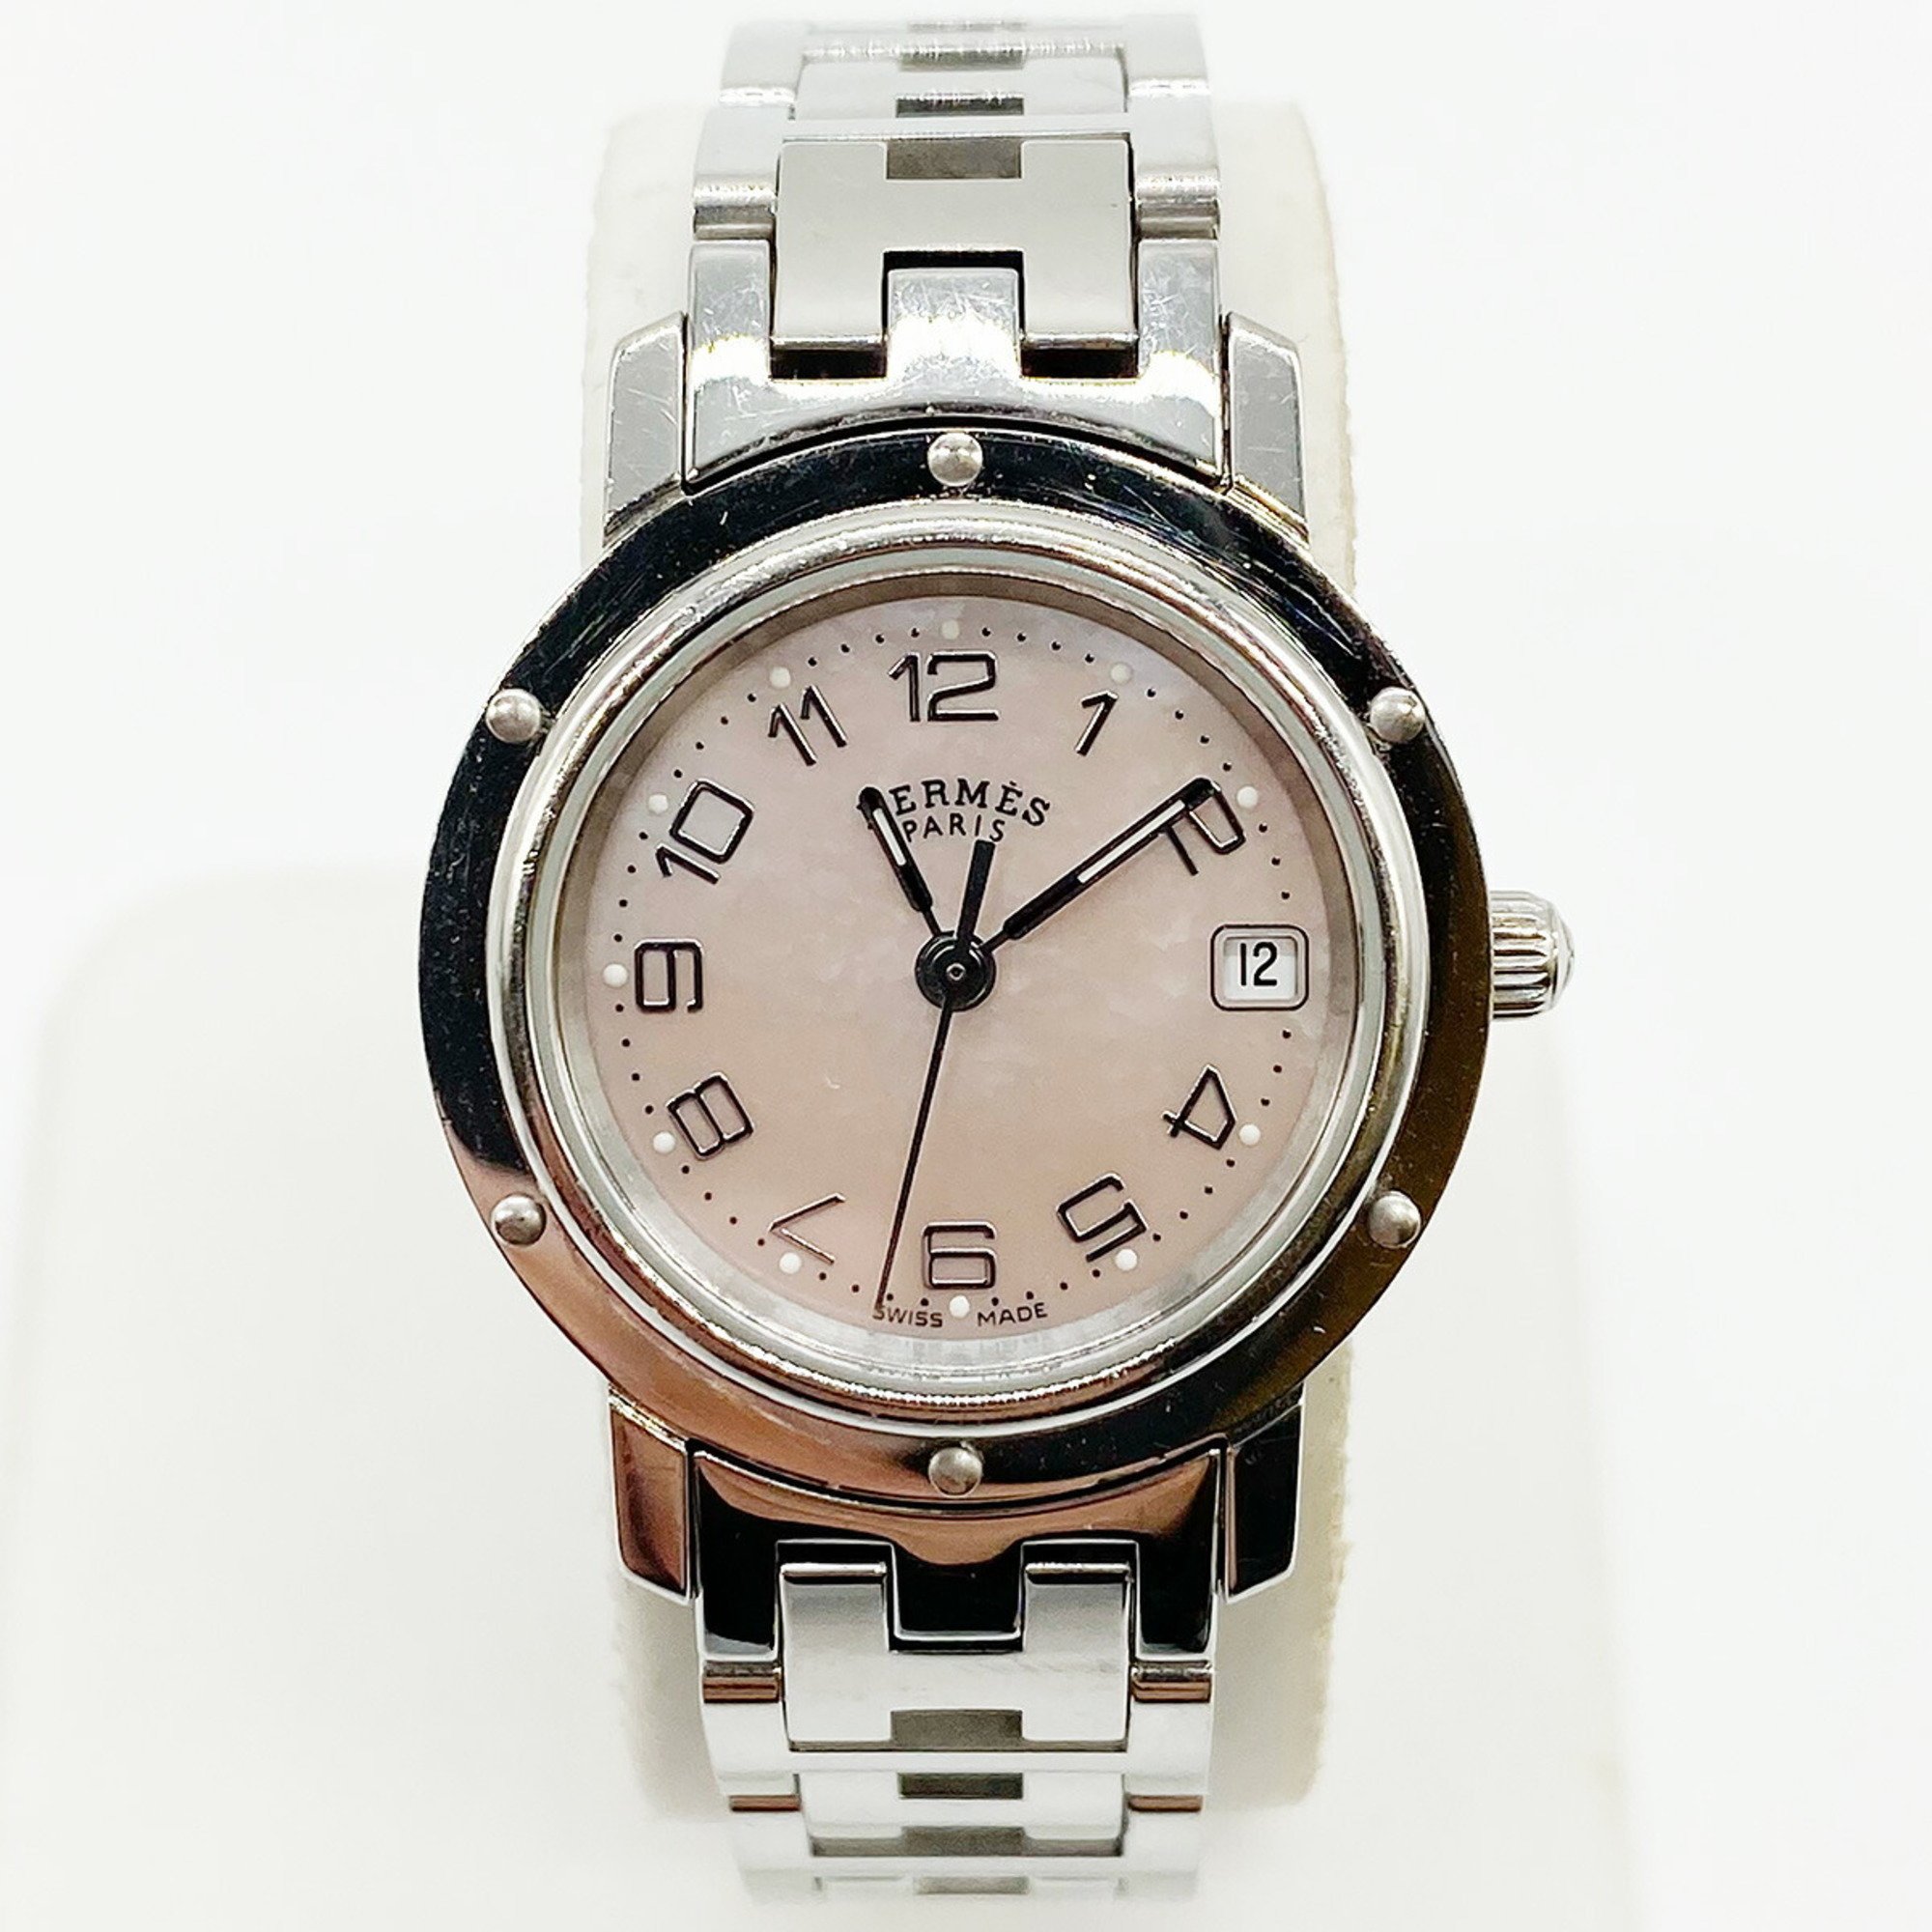 HERMES Watch CL4.210 Clipper Quartz Pink Shell Stainless Steel Dial Ladies Fashion